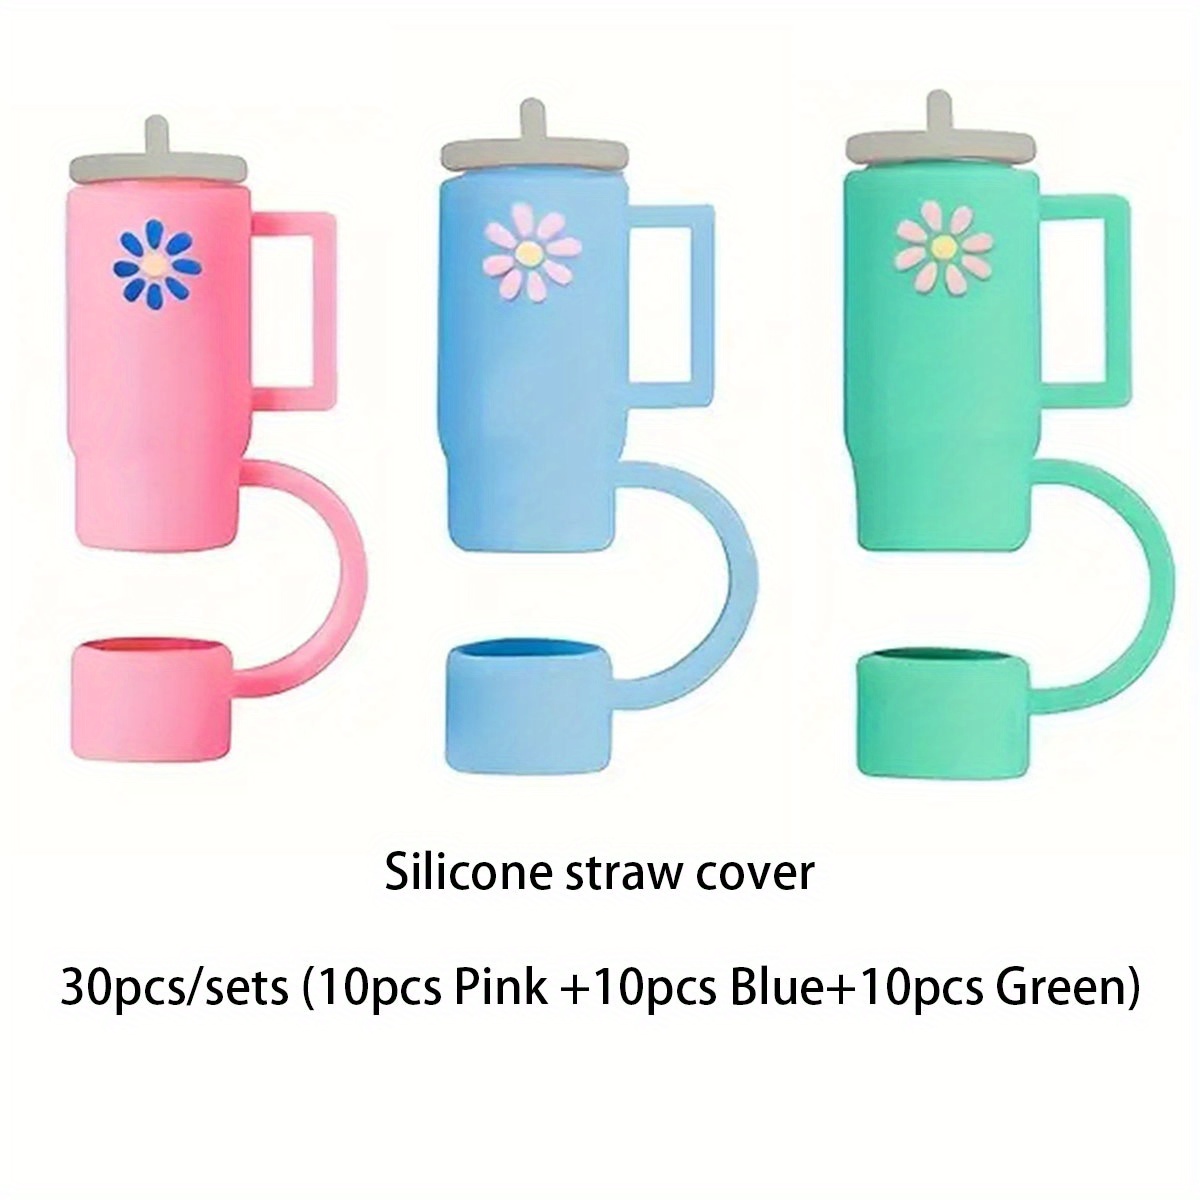 

30pcs/set Silicone Straw Cover, Reusable, Kitchen Drinking Straw Cover, Dustproof Plug, Suitable For Universal 10cm Diameter Straws